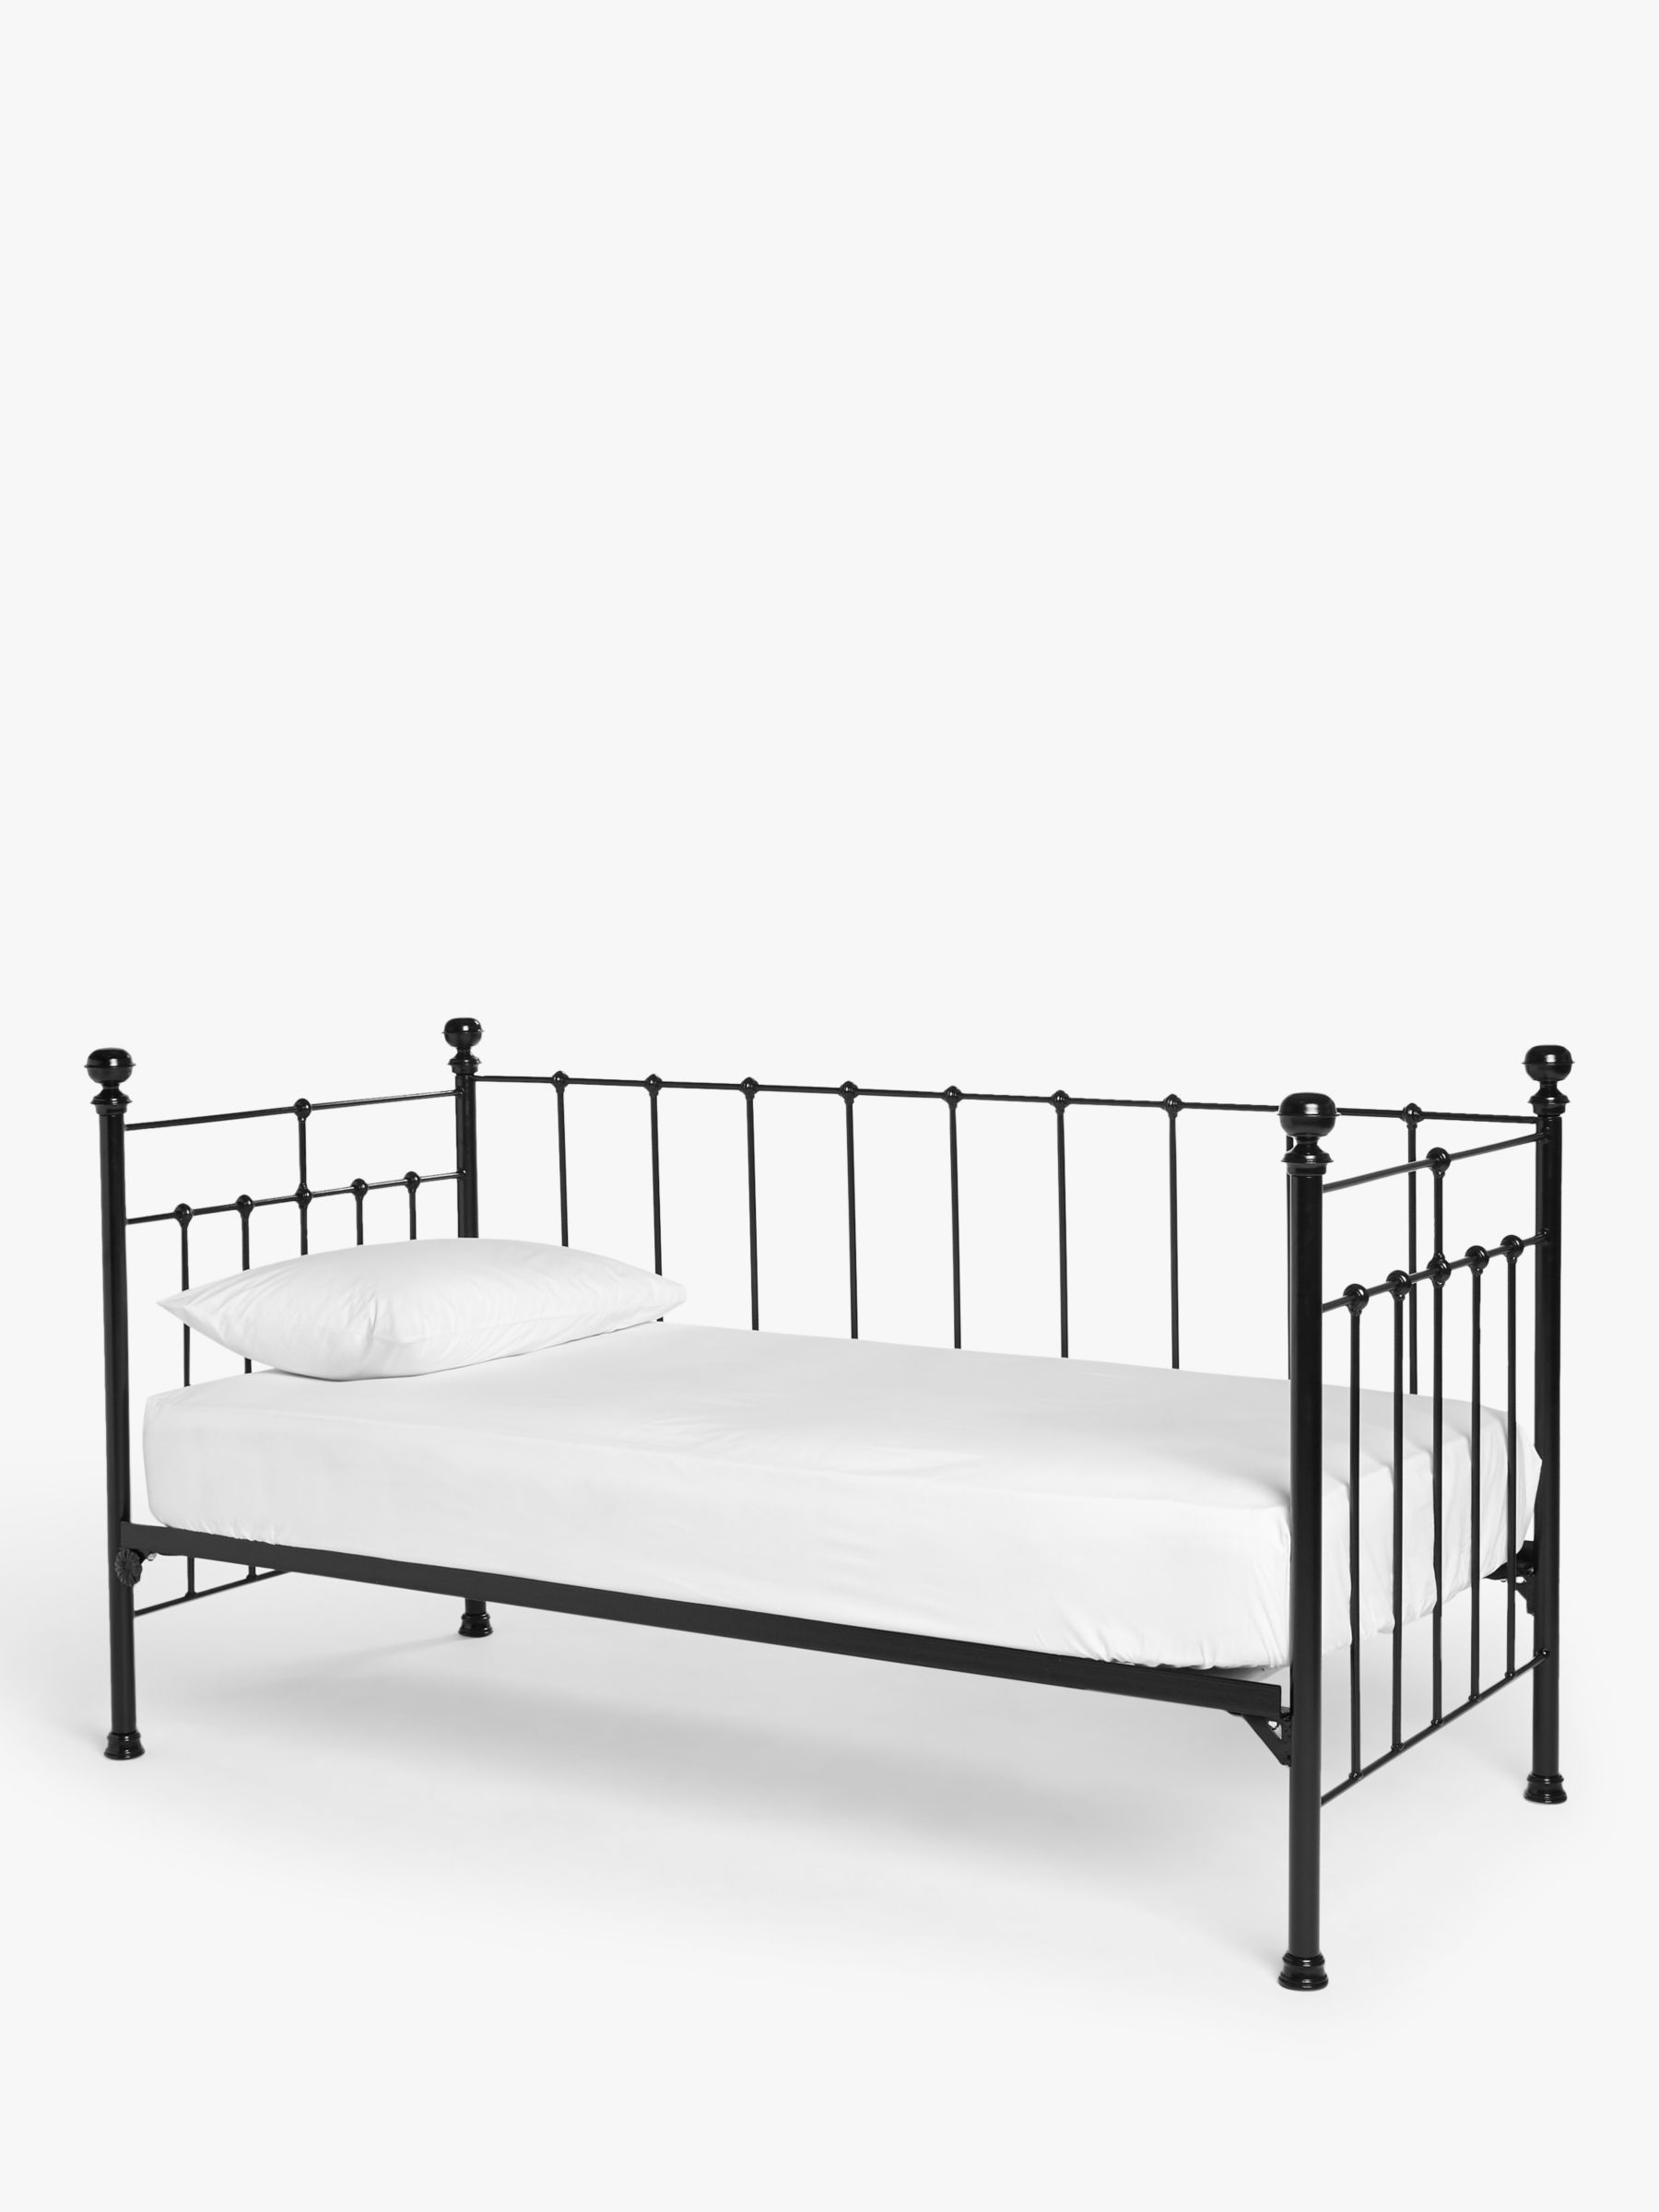 Brass Bed Co Sophie Iron Day Frame, Wrought Iron Single Bed Frame